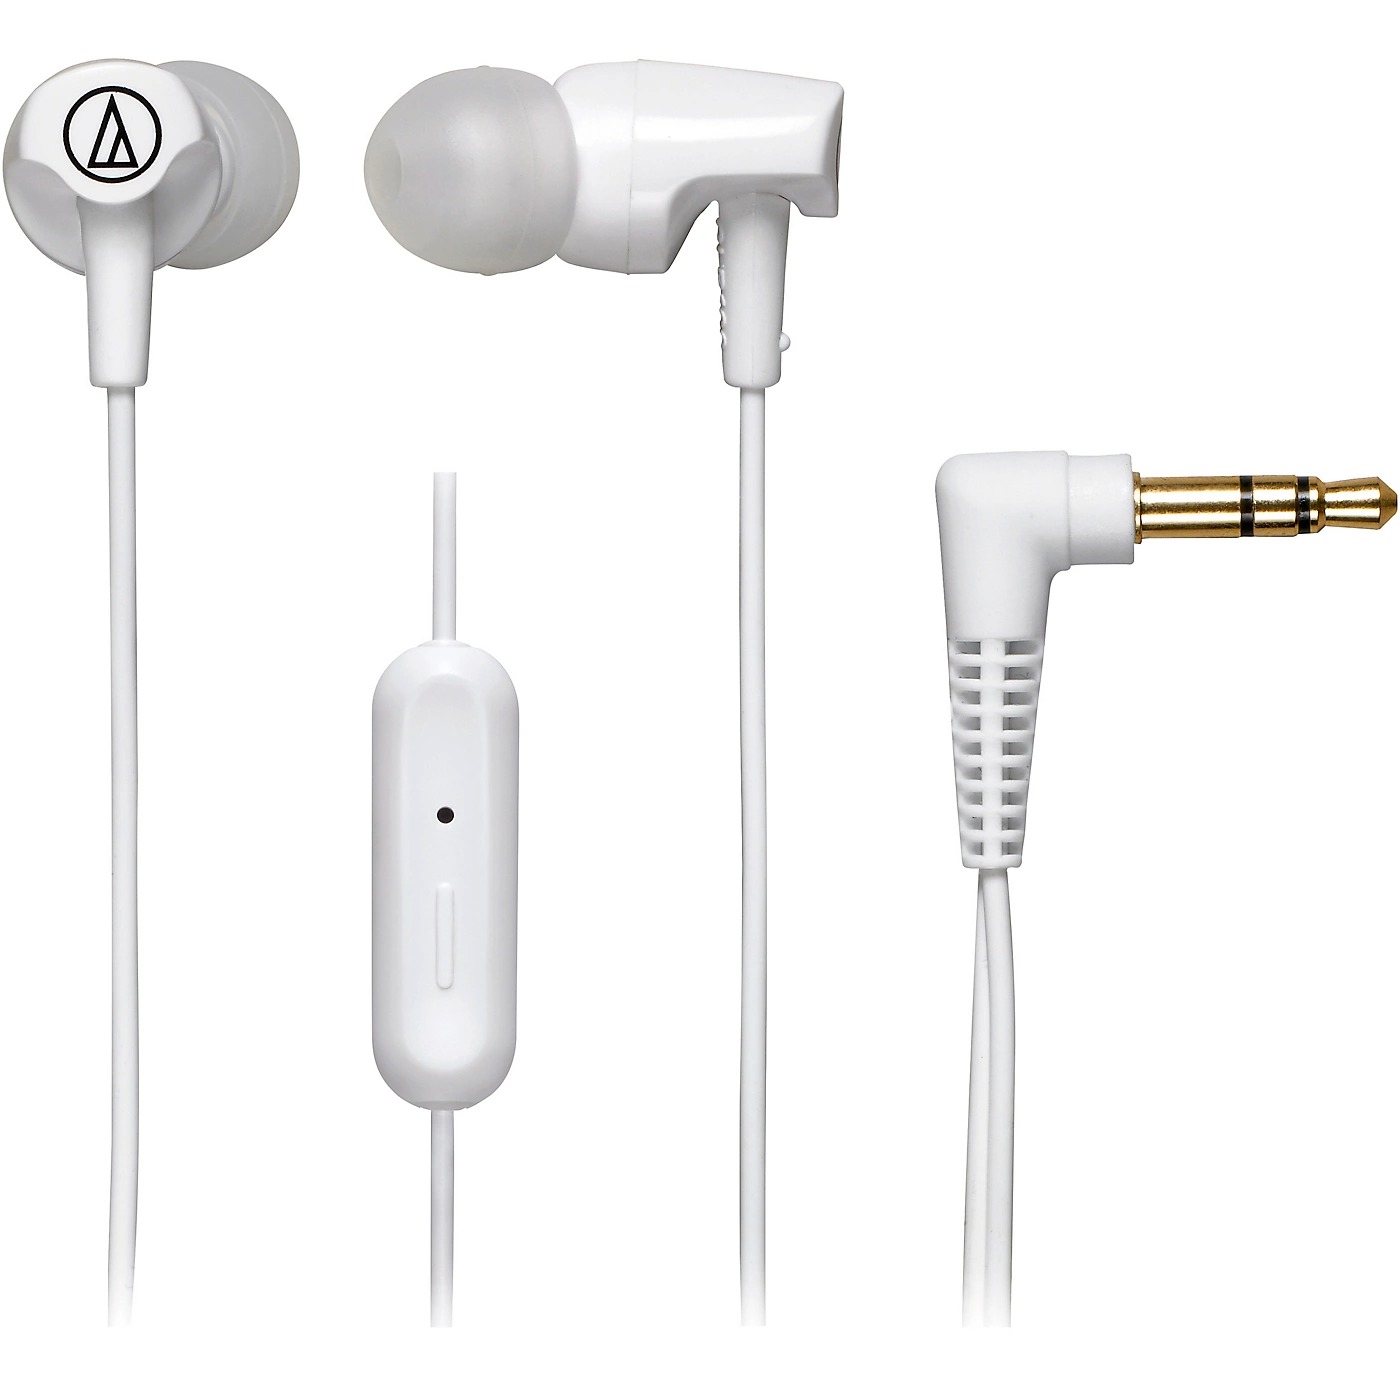 What Is The In-Line Mic On Headphones?